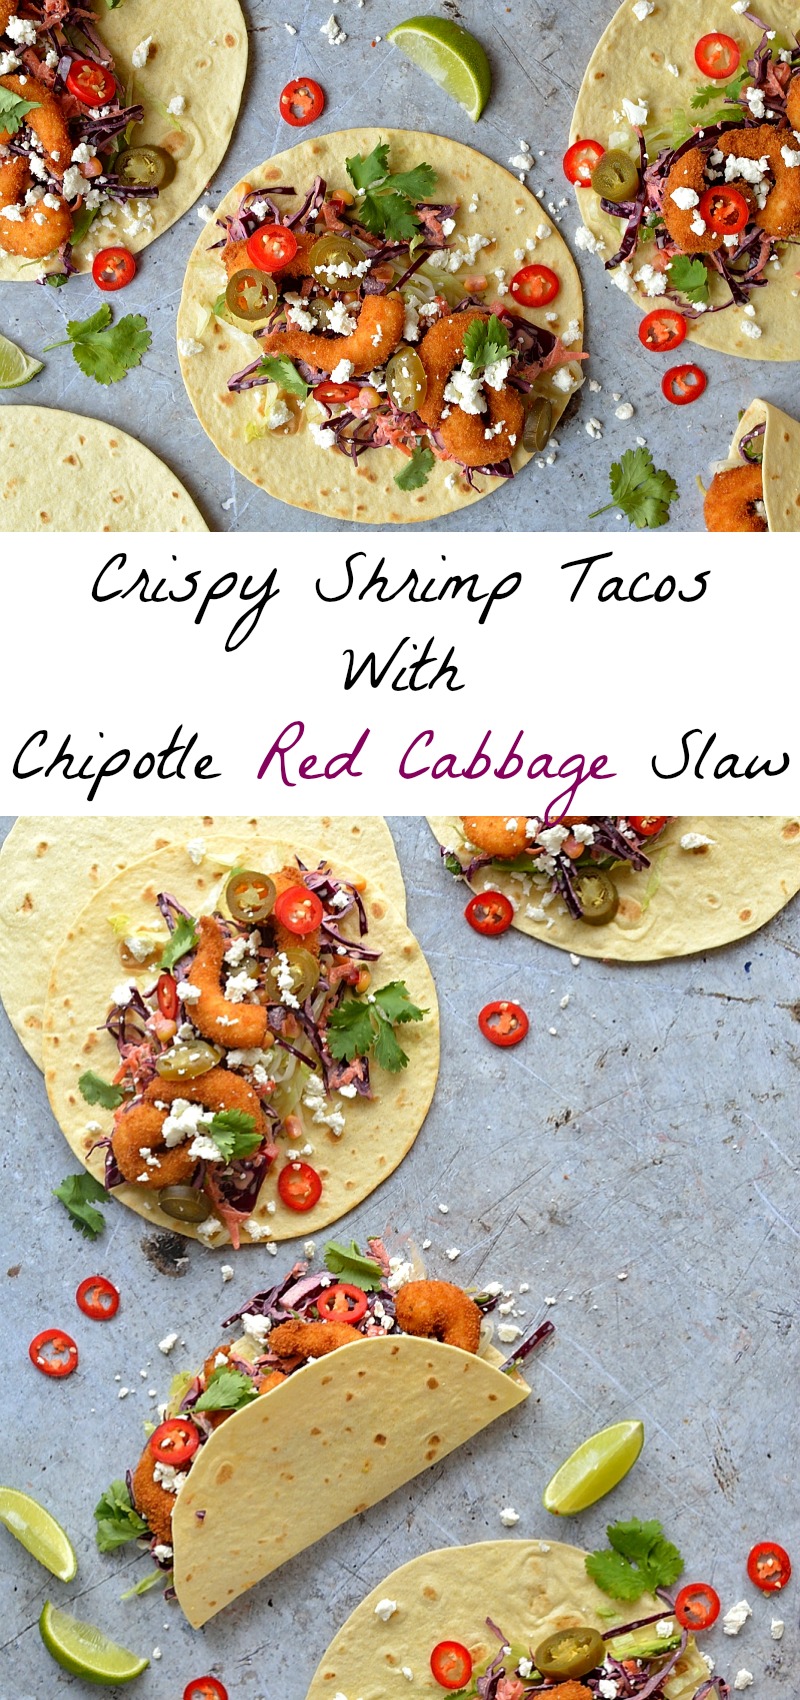 Crispy shrimp tacos with chipotle red cabbage slaw - the ultimate sharing food!